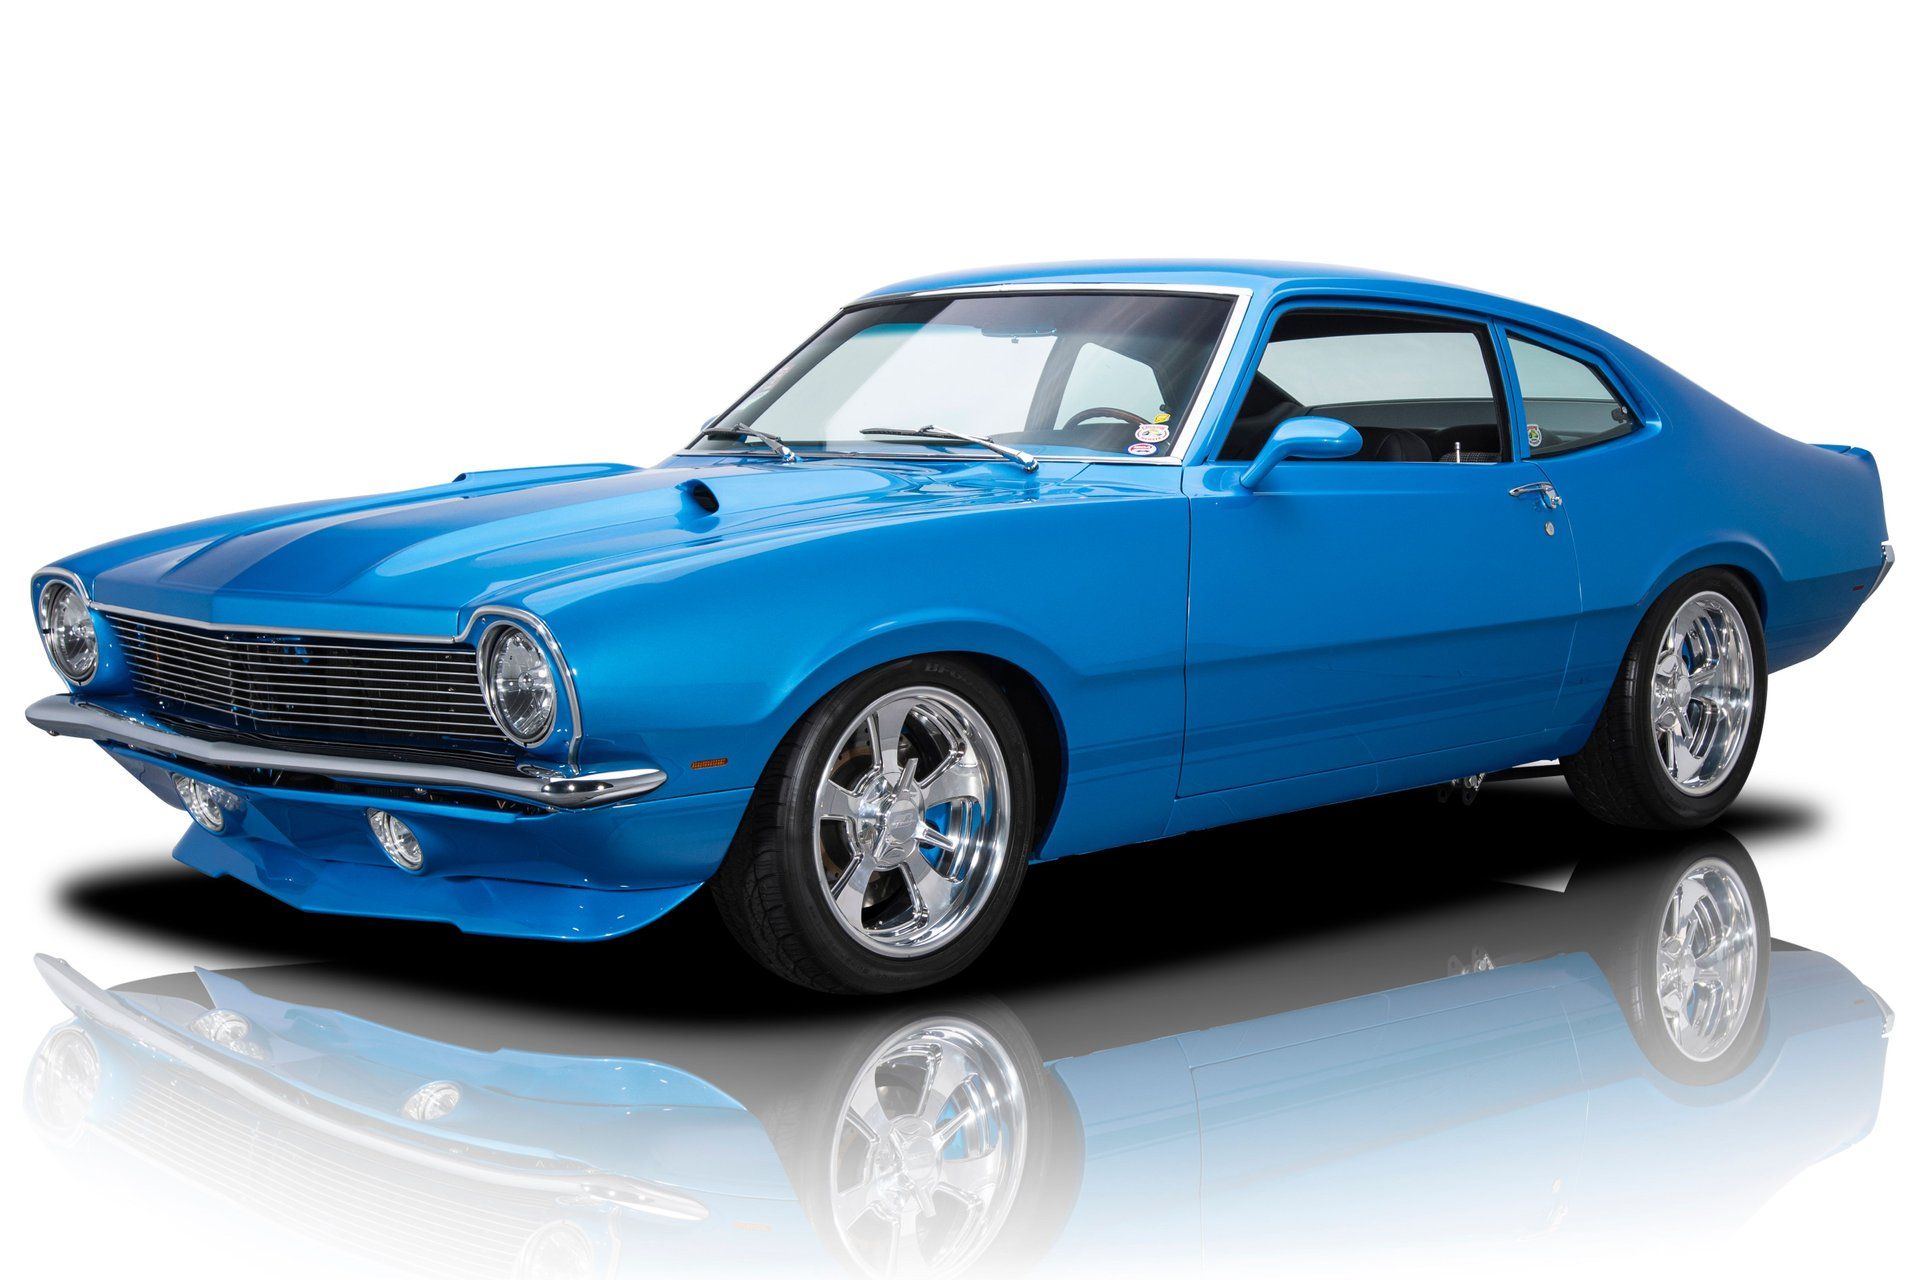 Ford's Maverick isn't one of the great muscle cars, but with a li...